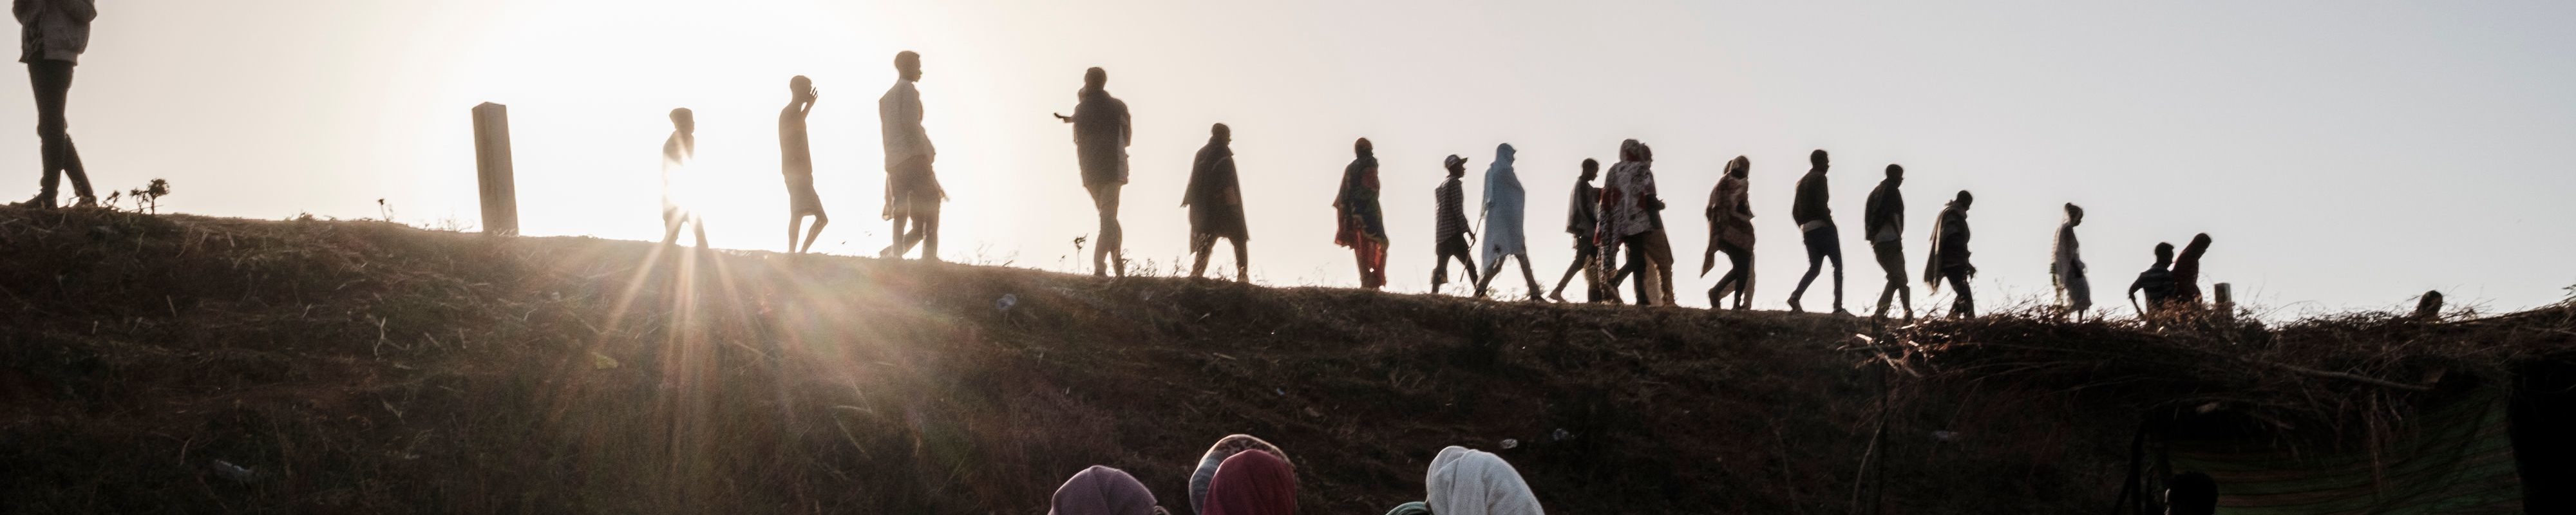 Internally Displaced People, fleeing from violence in the Metekel zone in Western Ethiopia, walk on a route as others stand below in a camp in Chagni, Ethiopia, on January 28, 2021.